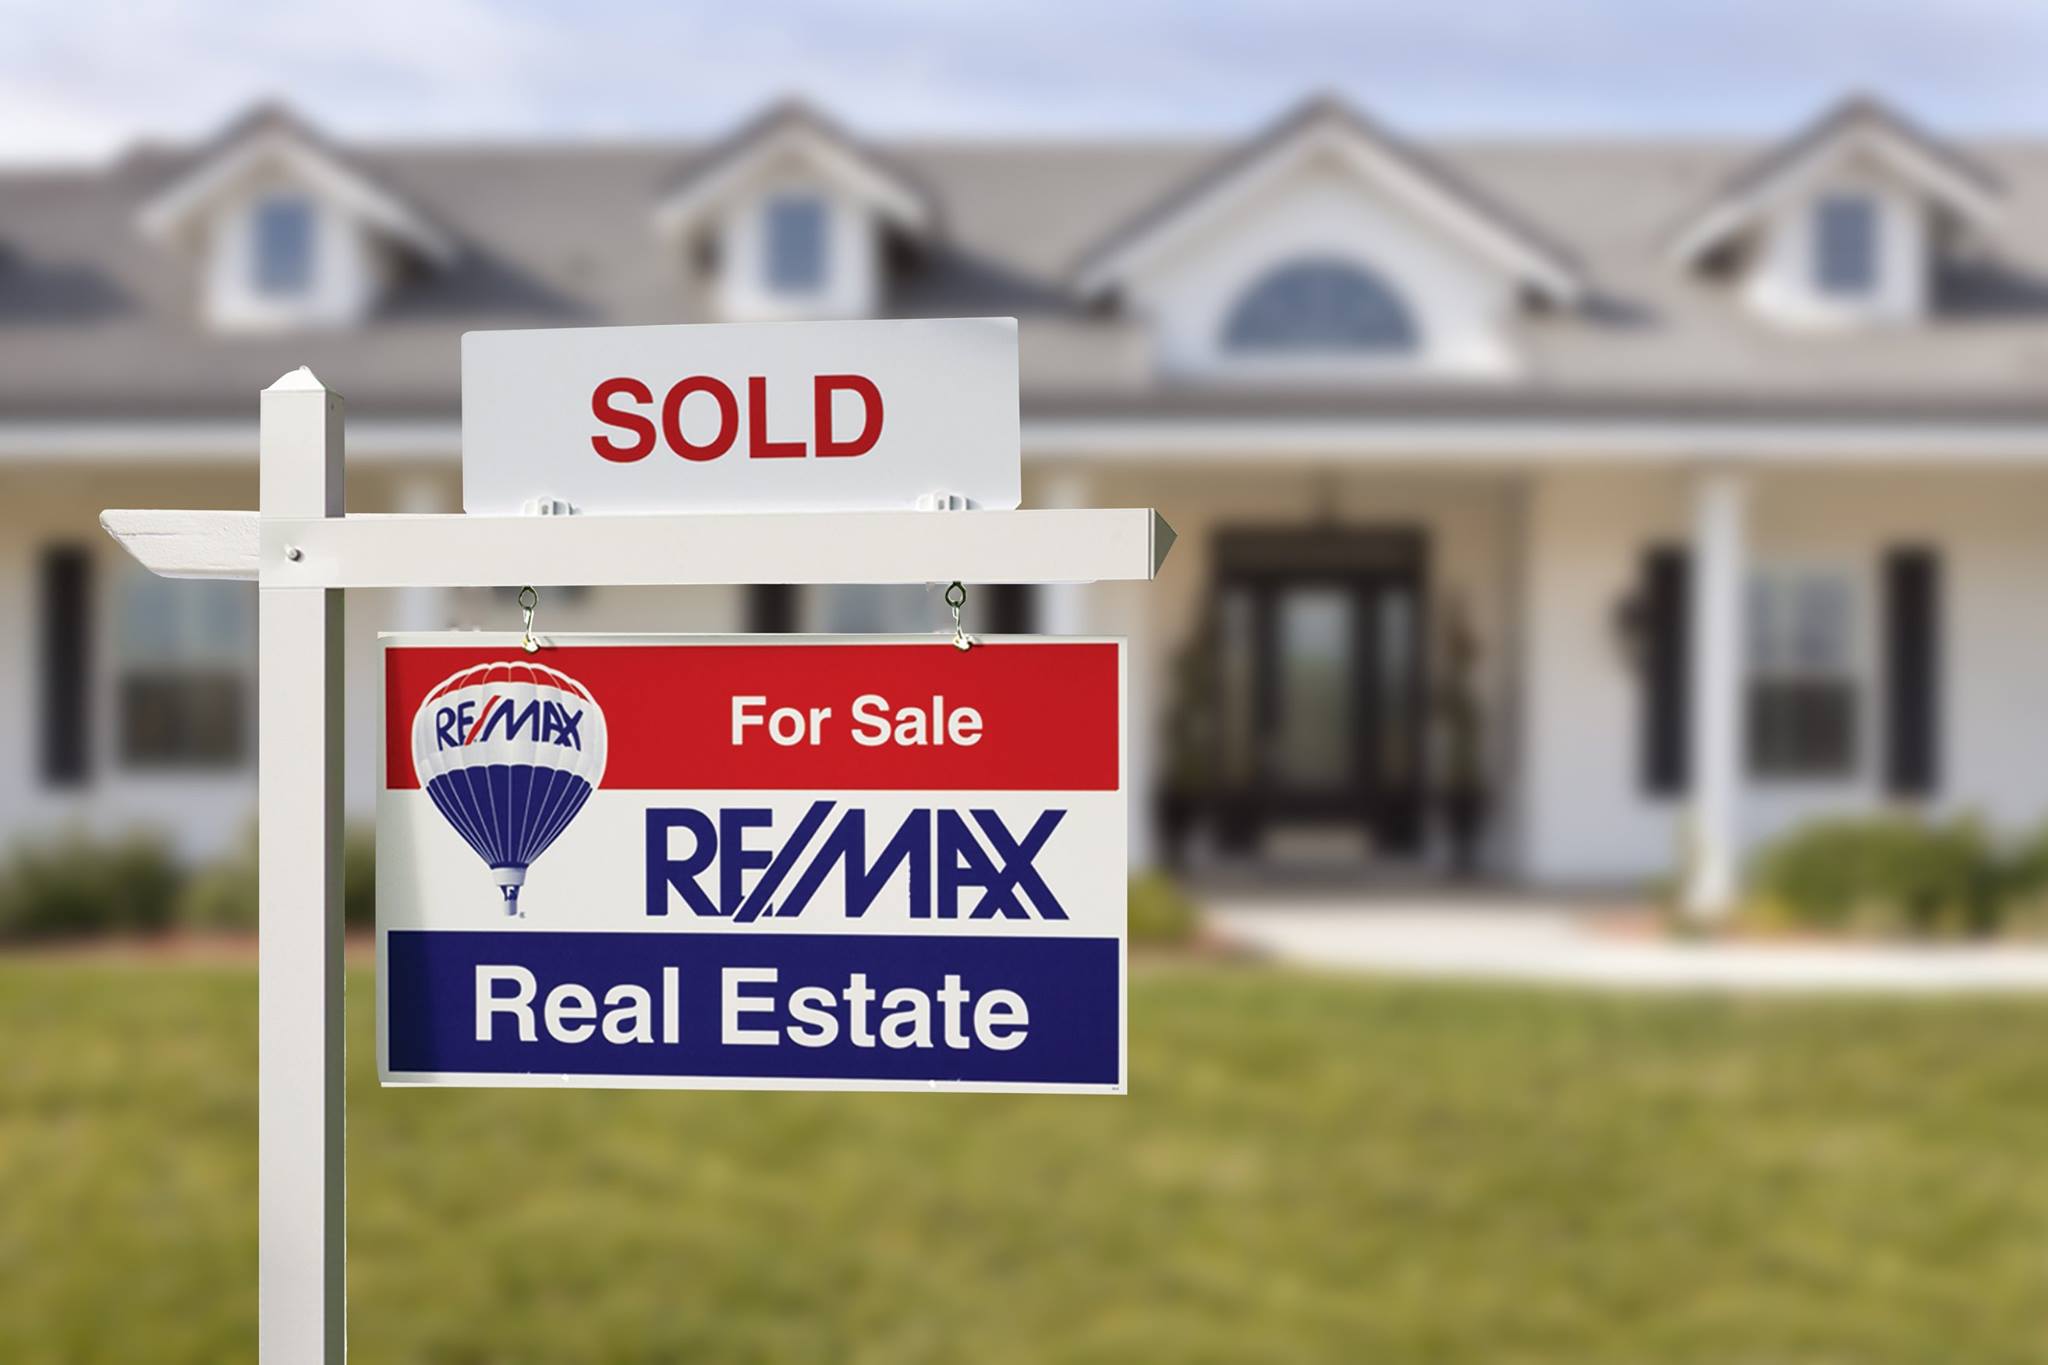 Sold sign for REMAX Real Estate